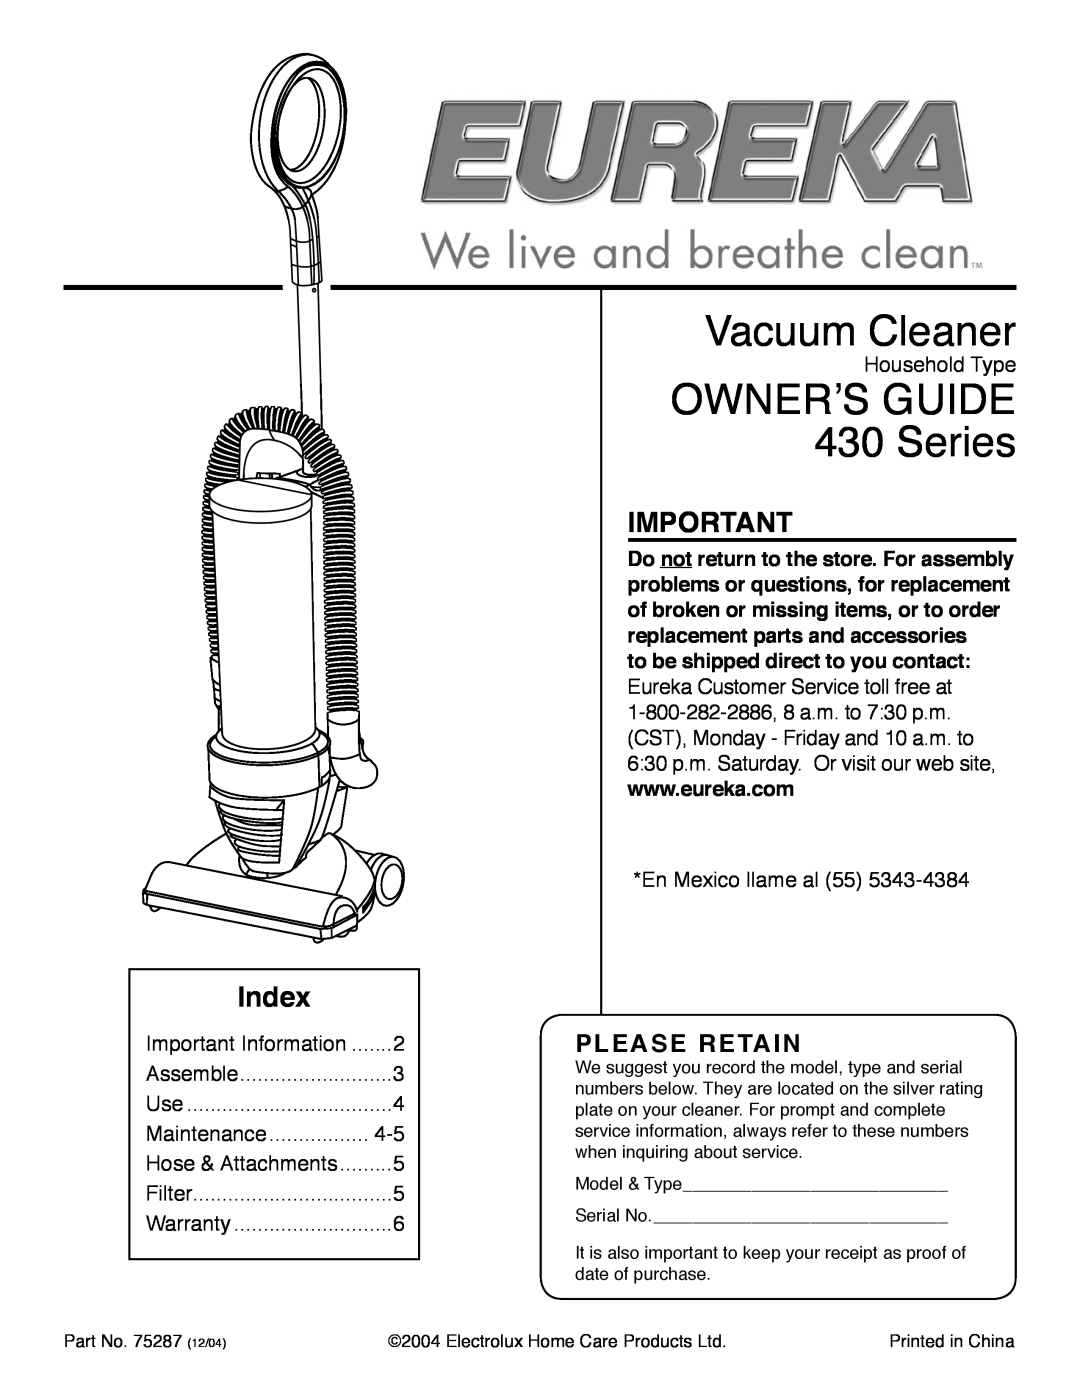 Eureka warranty Index, to be shipped direct to you contact, Vacuum Cleaner, OWNERʼS GUIDE 430 Series, Please Retain 